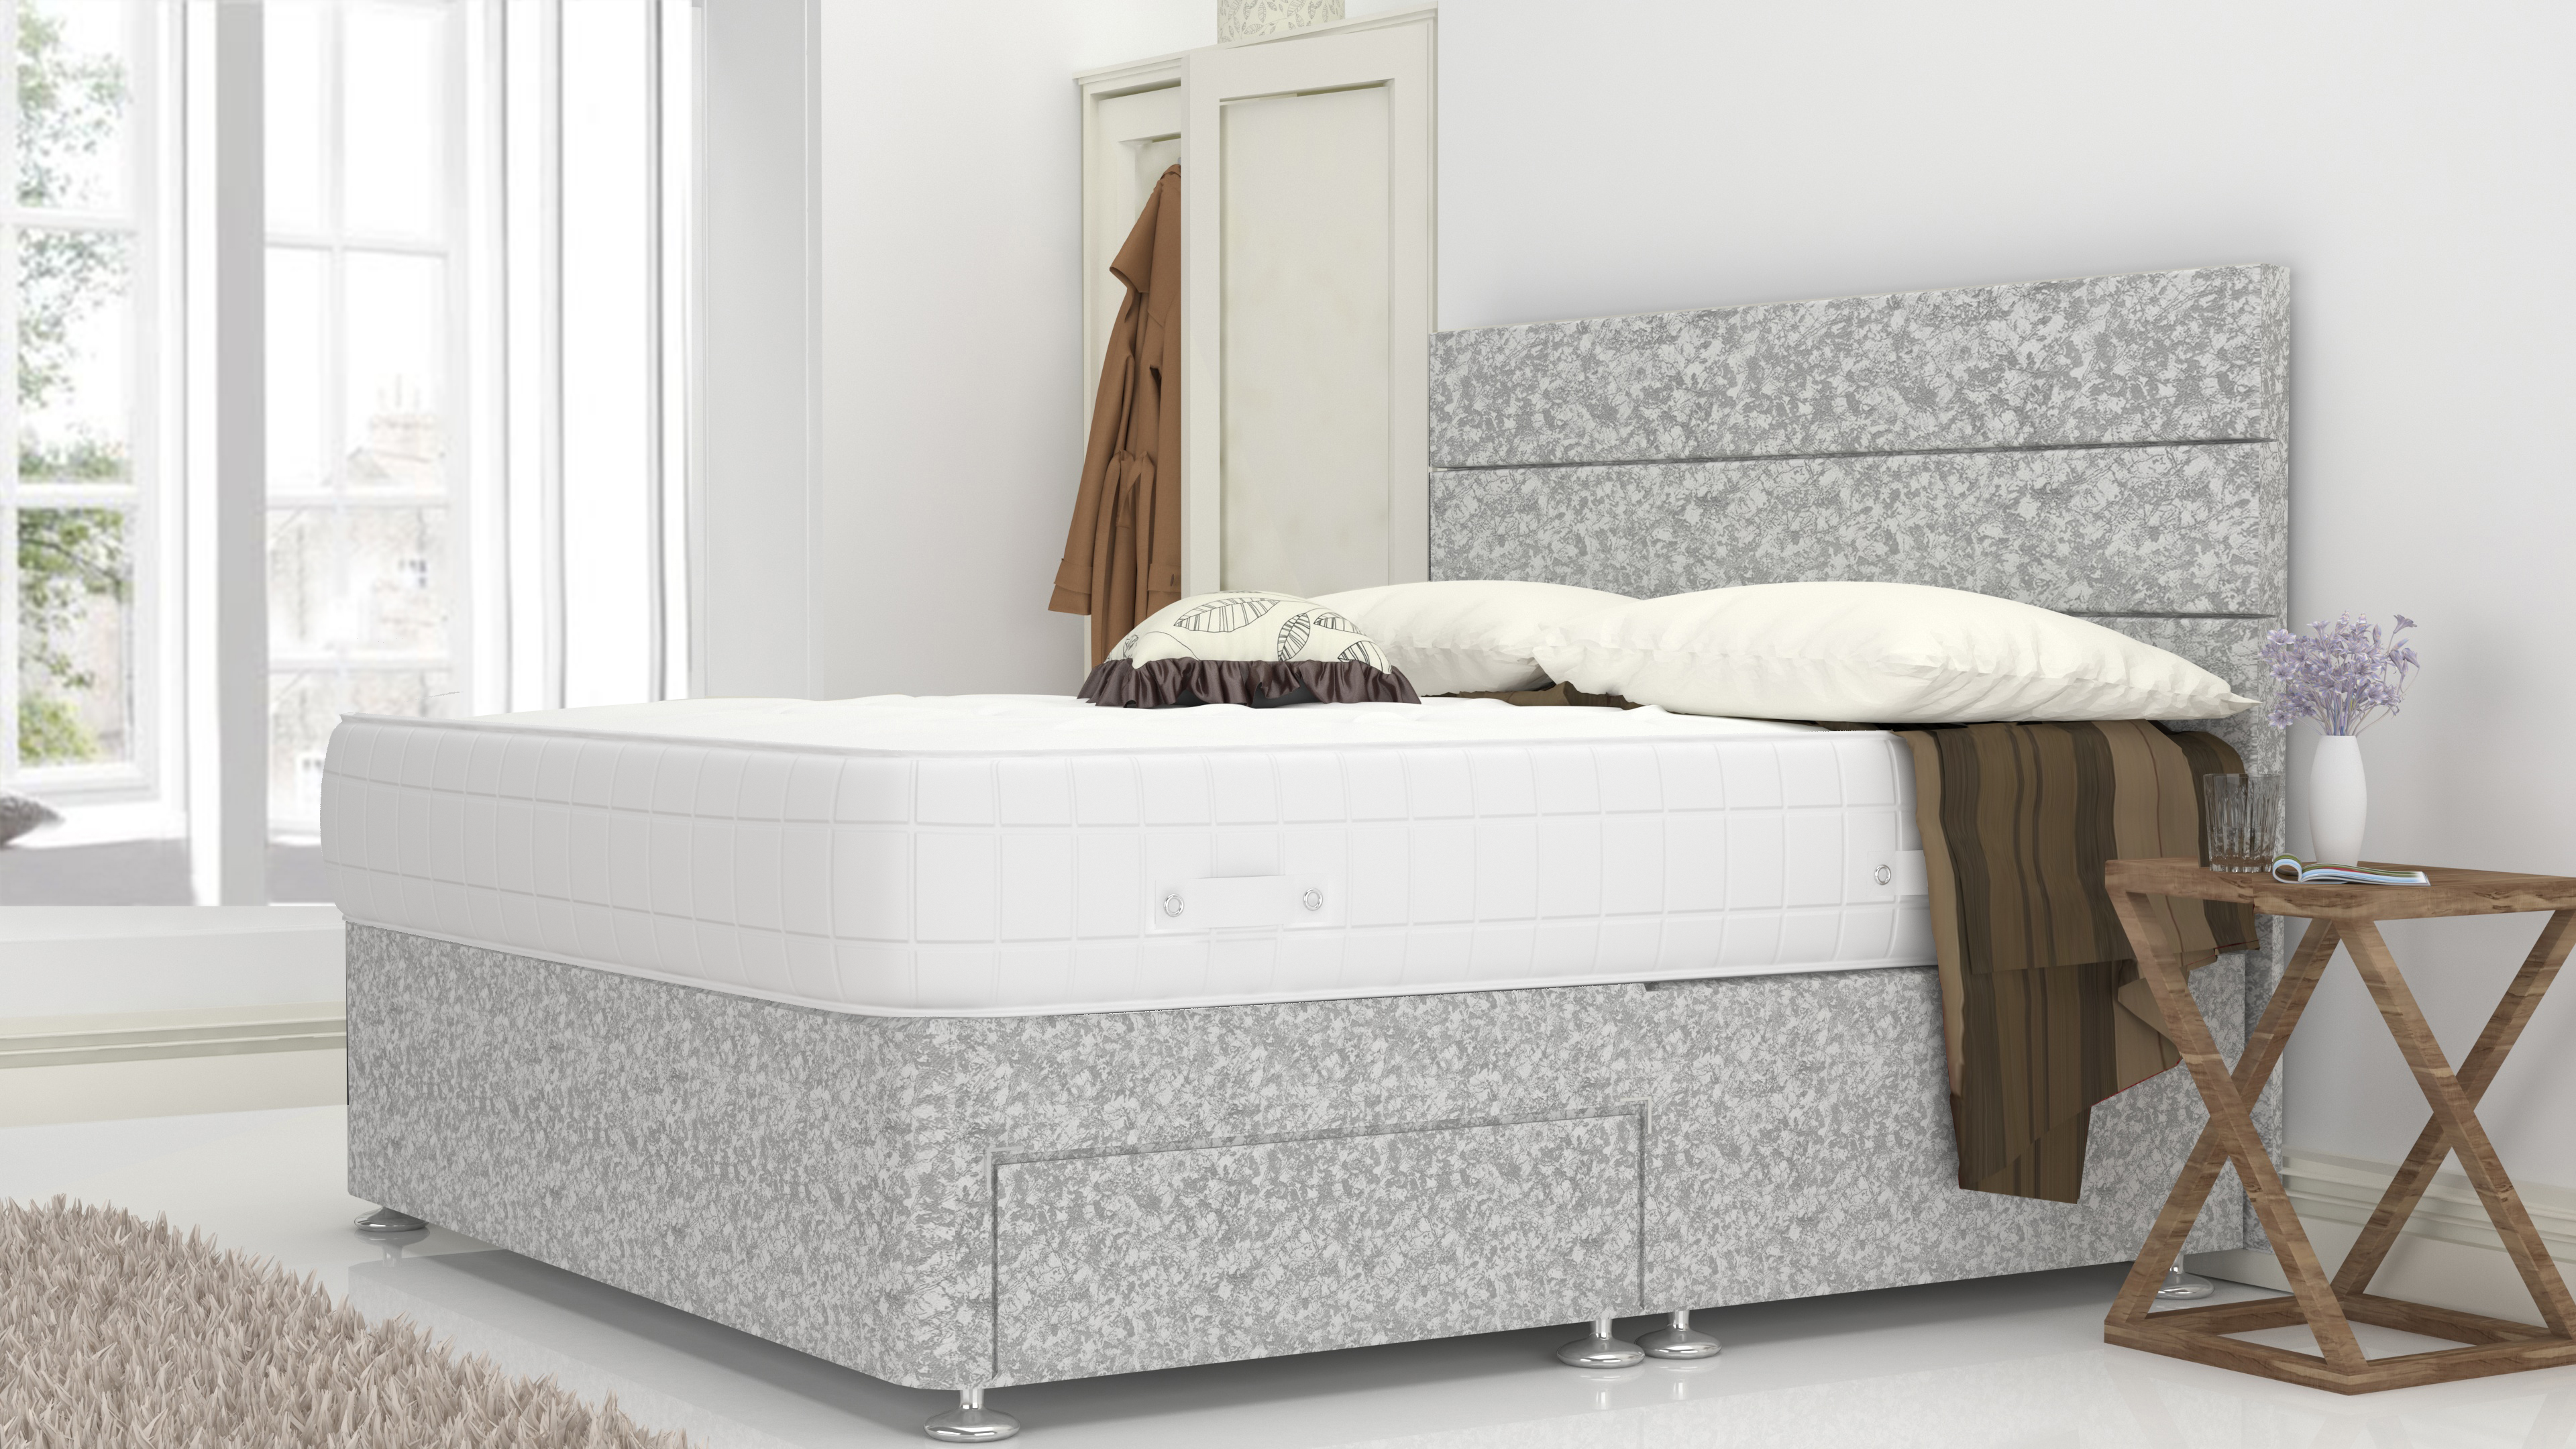 Silver Crushed 3 Feet Divan Bed Set With 3 Panel Headboard (Included Feet) And Free Pillow Top Mattress